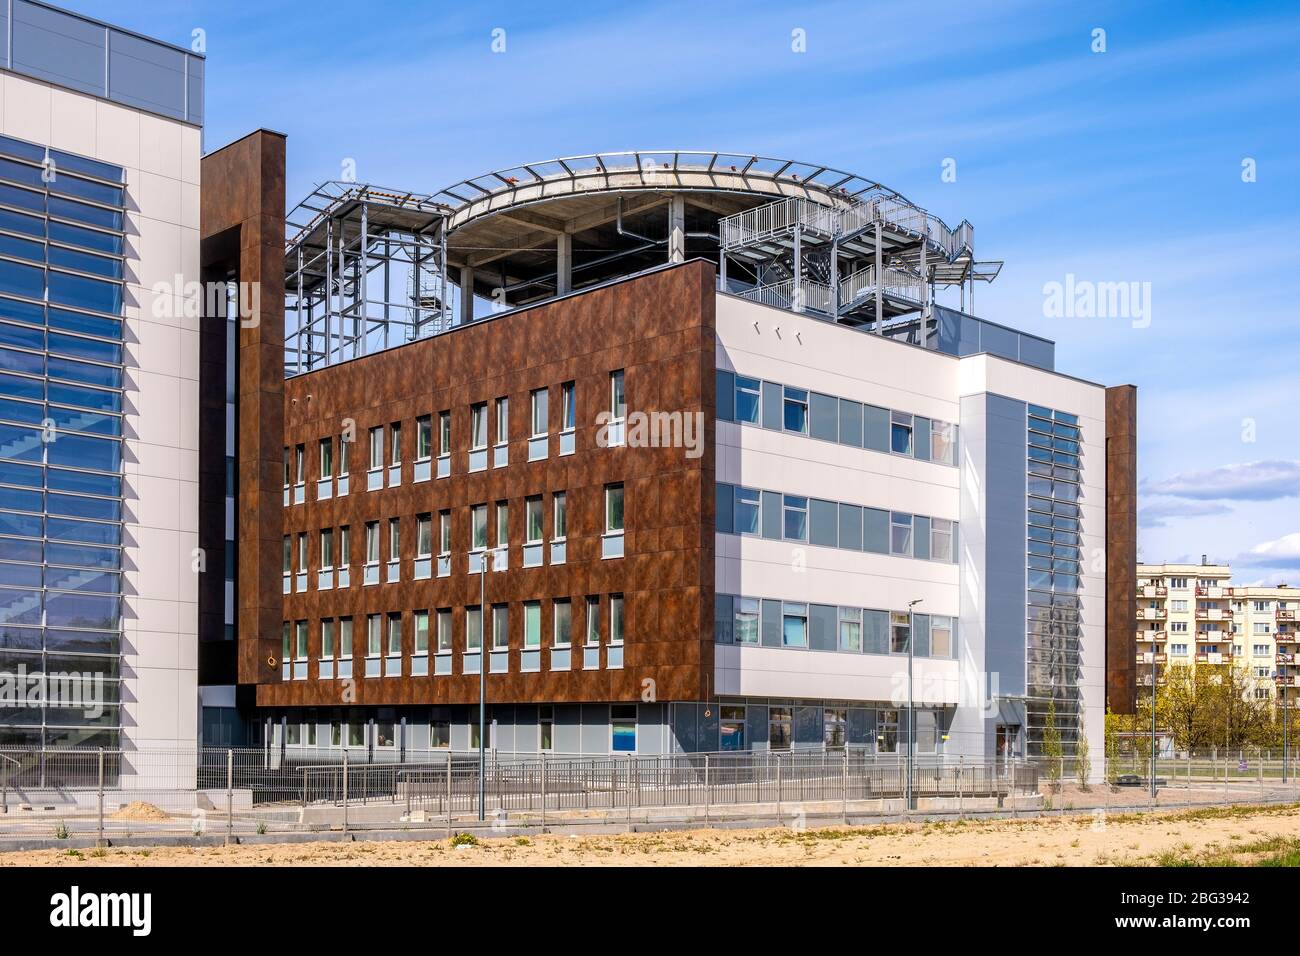 Warsaw, Mazovia / Poland - 2020/04/18: Newly developed Southern Hospital medical complex - Szpital Poludniowy - with rooftop helicopter landing field Stock Photo